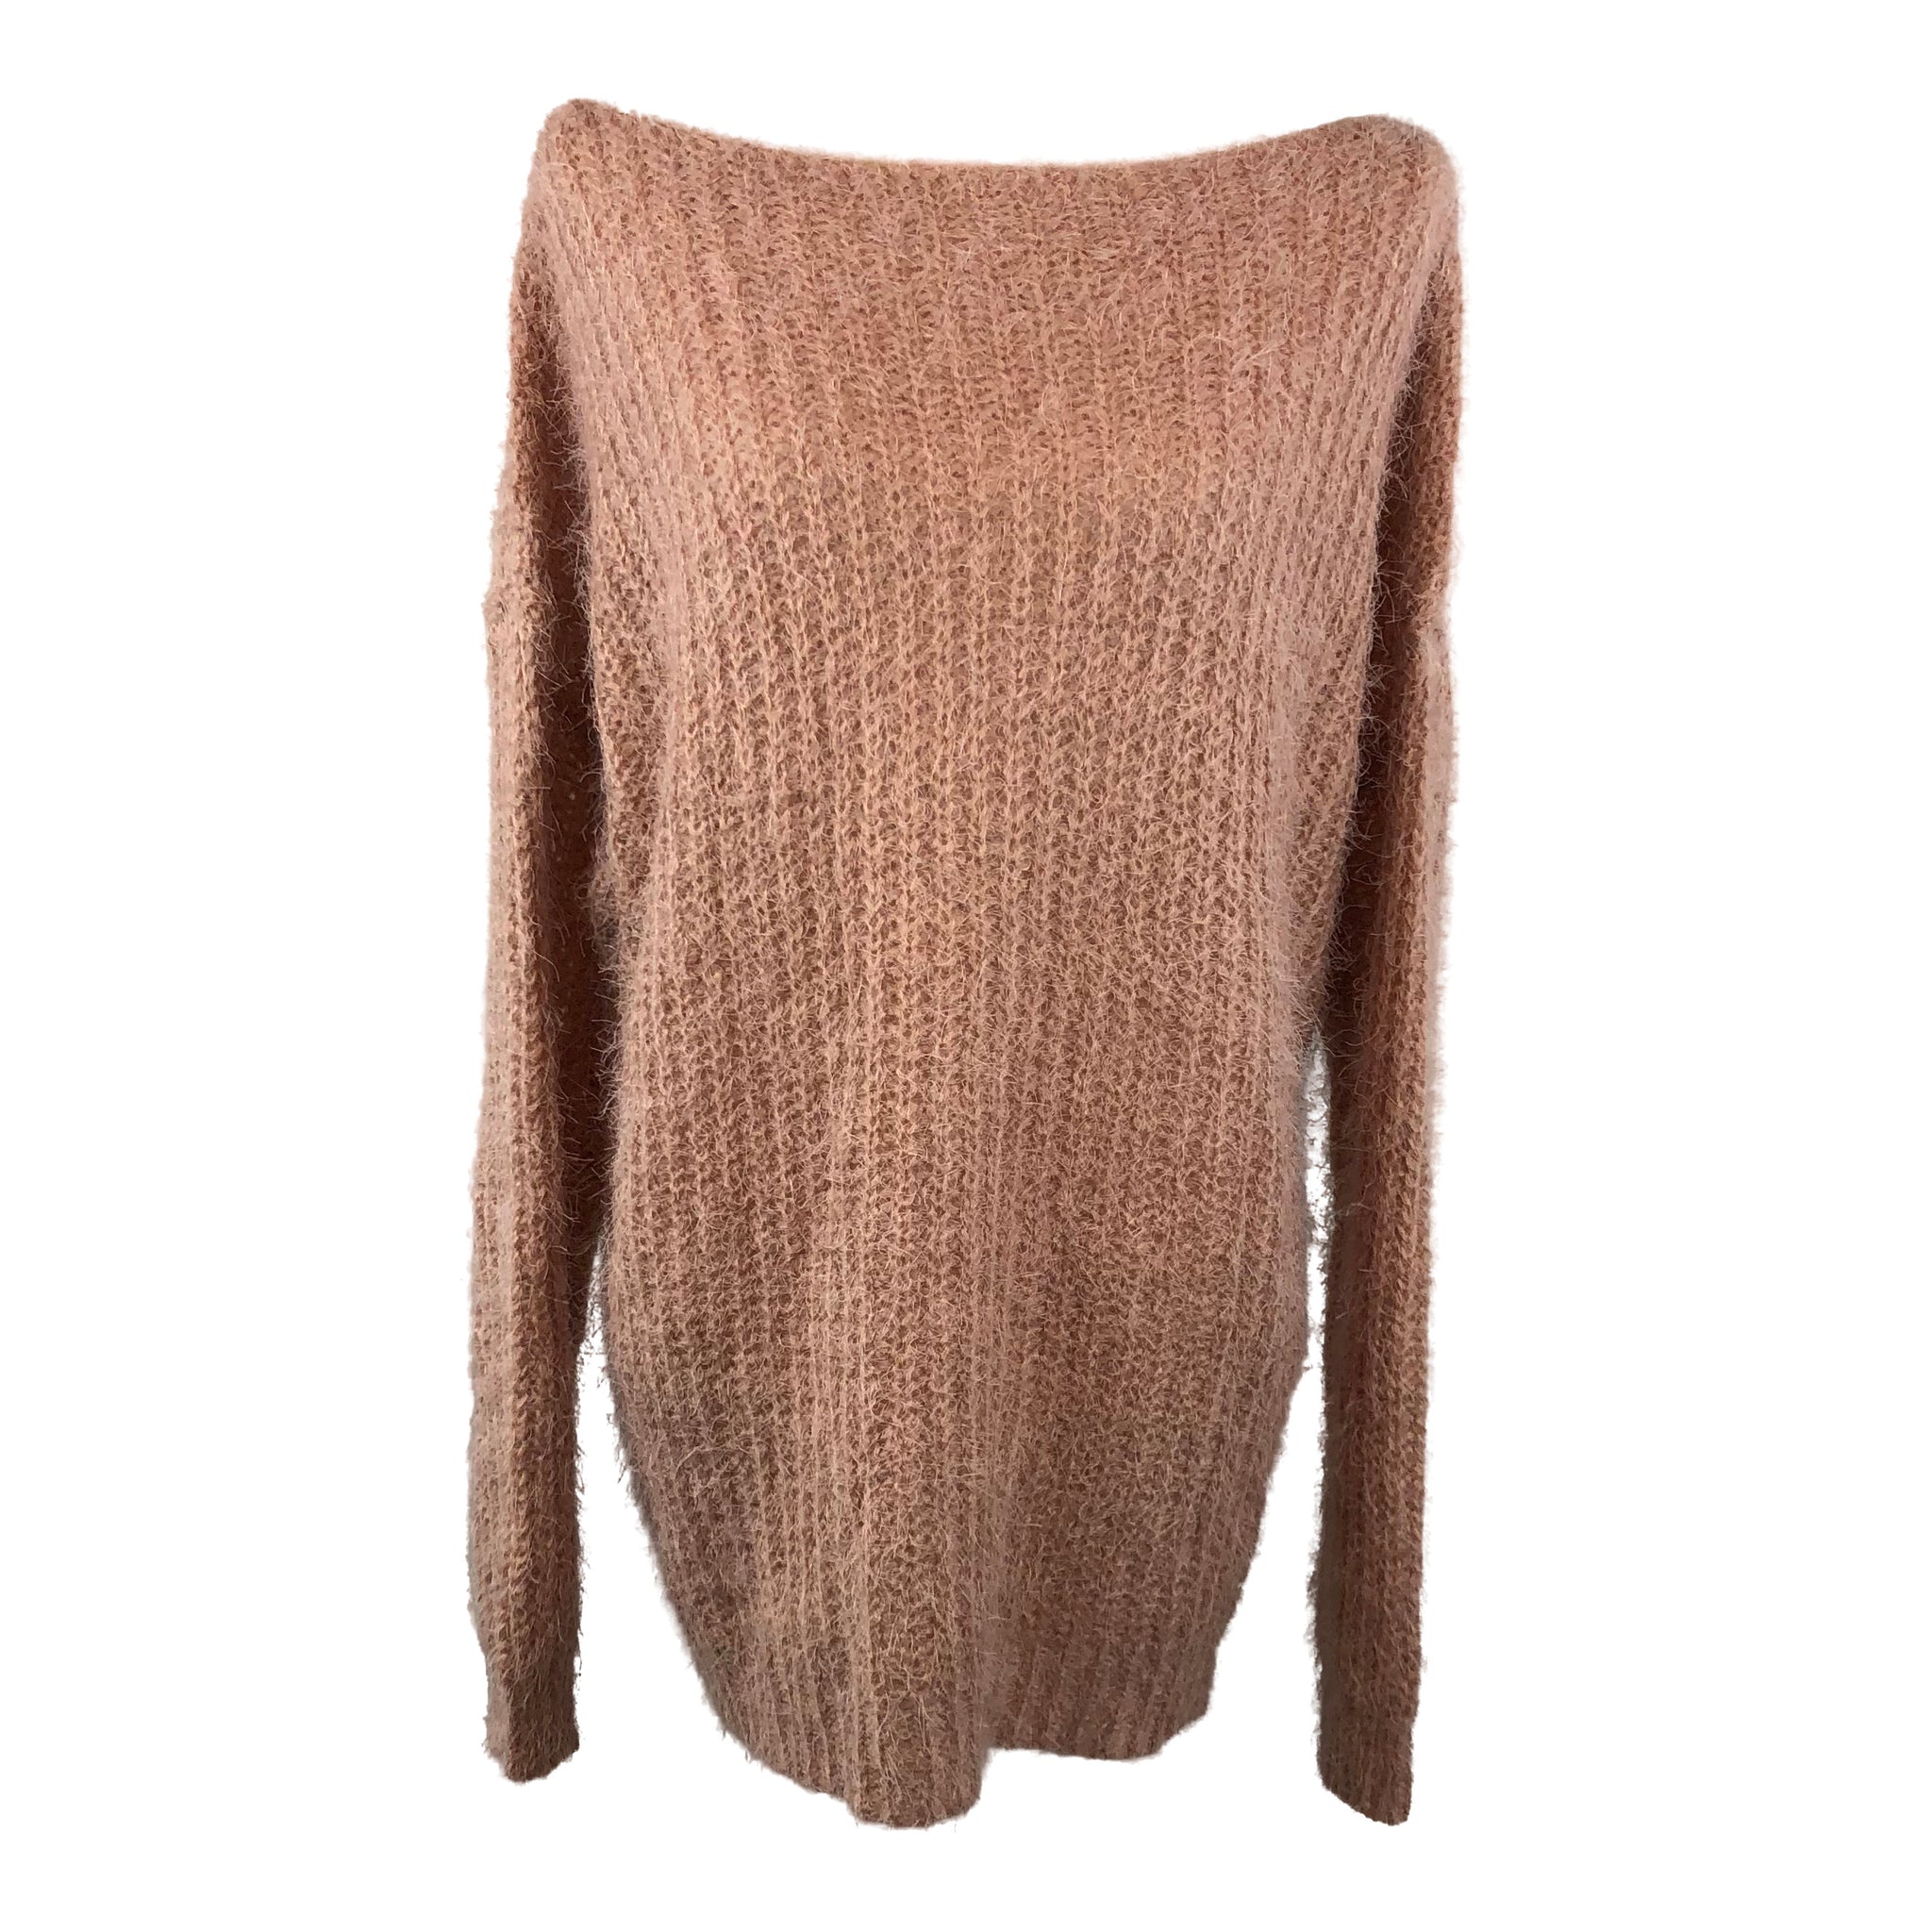 MOHAIR SOFT LOOSE FIT SWEATER TUNIC